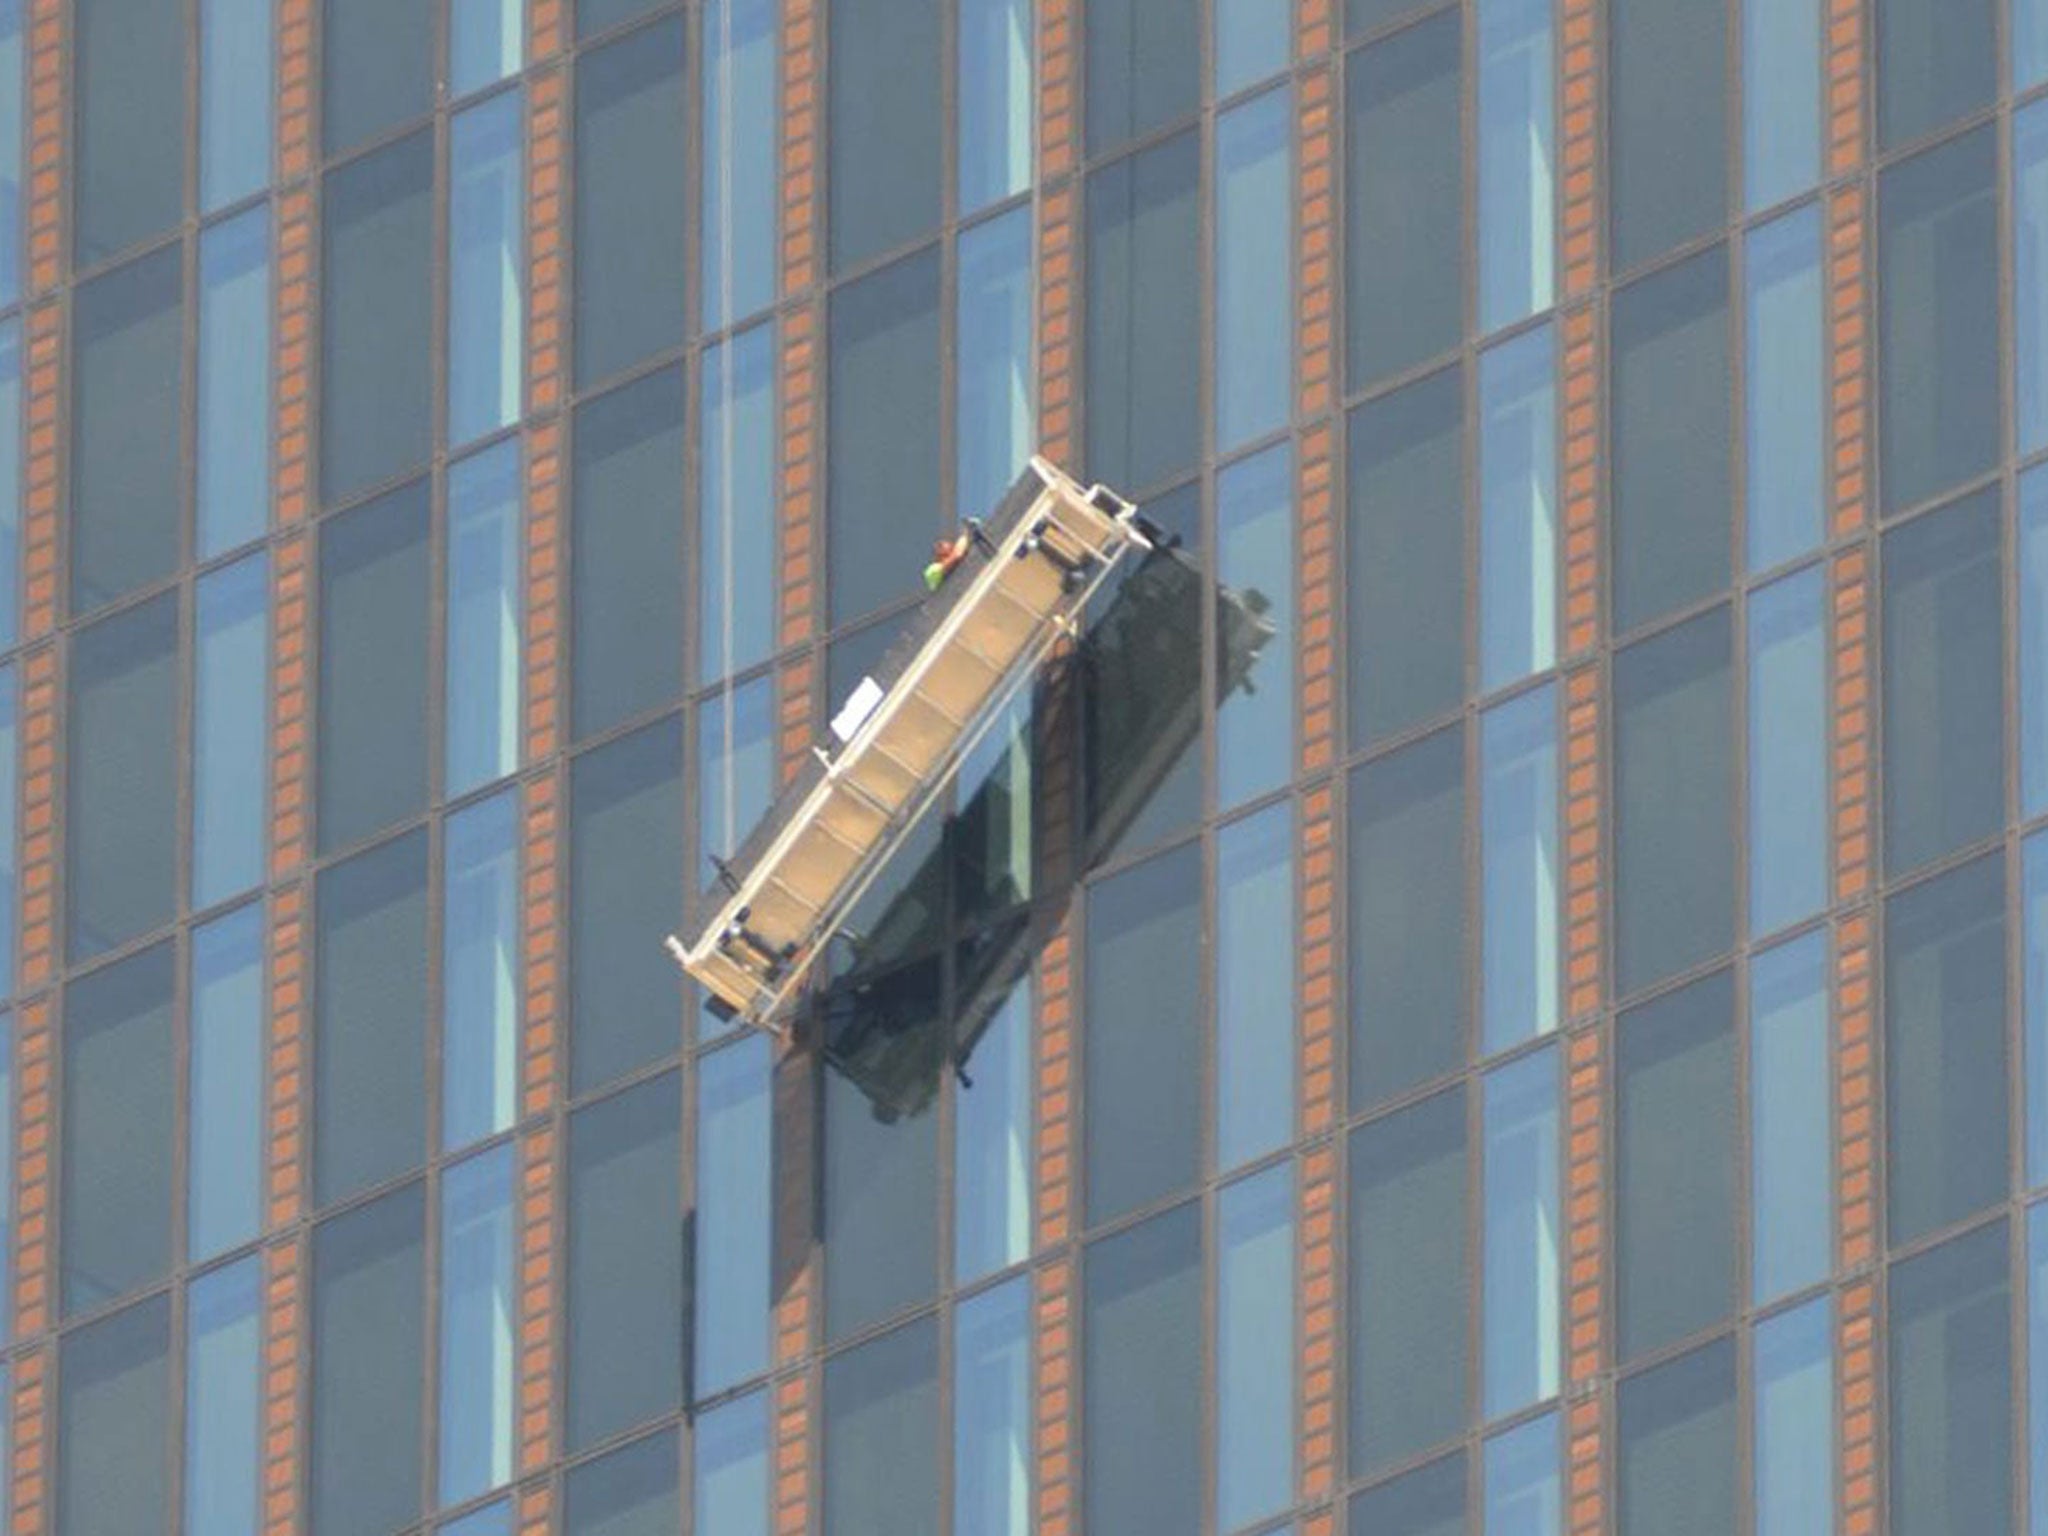 Two window cleaners were trapped 144 metres up from the ground on the 48th floor in front of the 'DC-Tower,' Austria's highest skyscraper